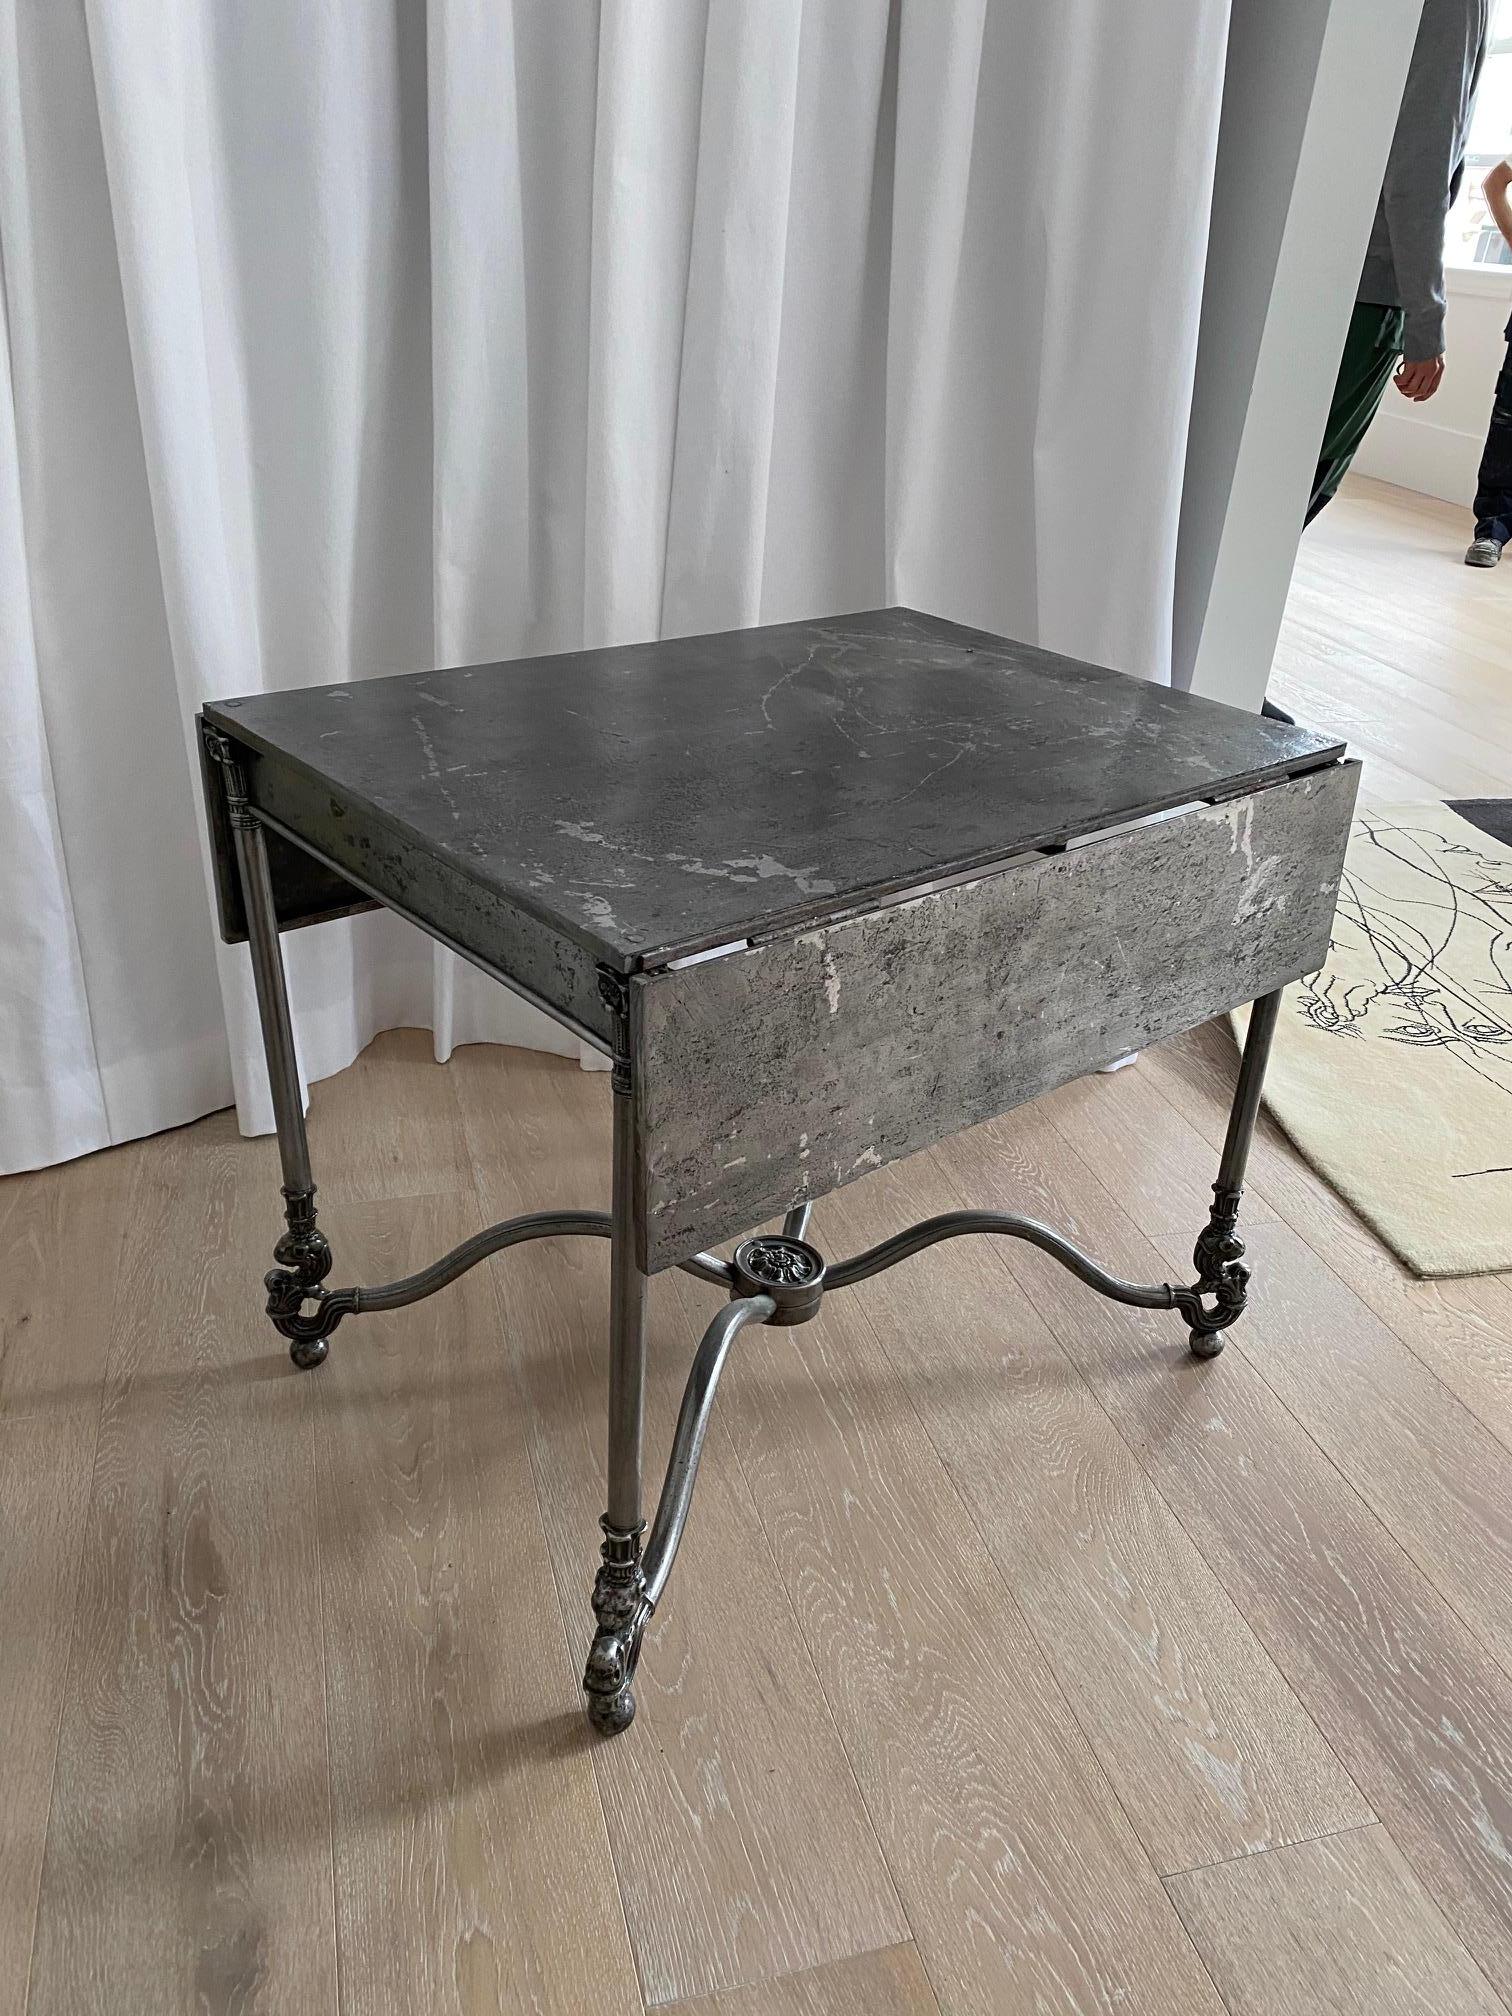 French 19th century steel folding table decorated with Corinthian legs and scroll feet when open at full extension the length is 37.5 in.